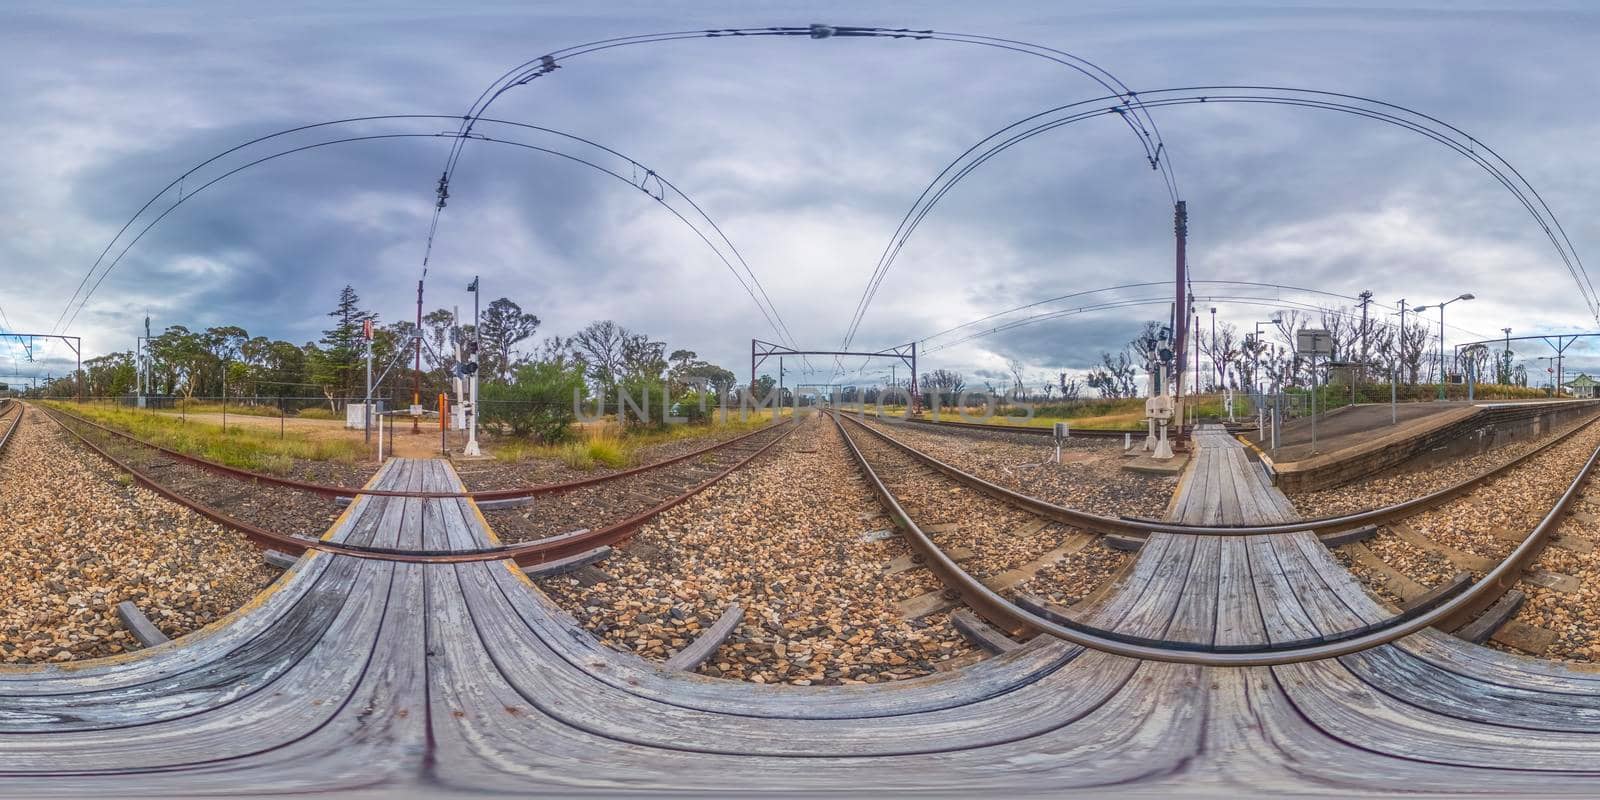 Spherical 360 panorama photograph of the Bell Railway Station in The Blue Mountains by WittkePhotos